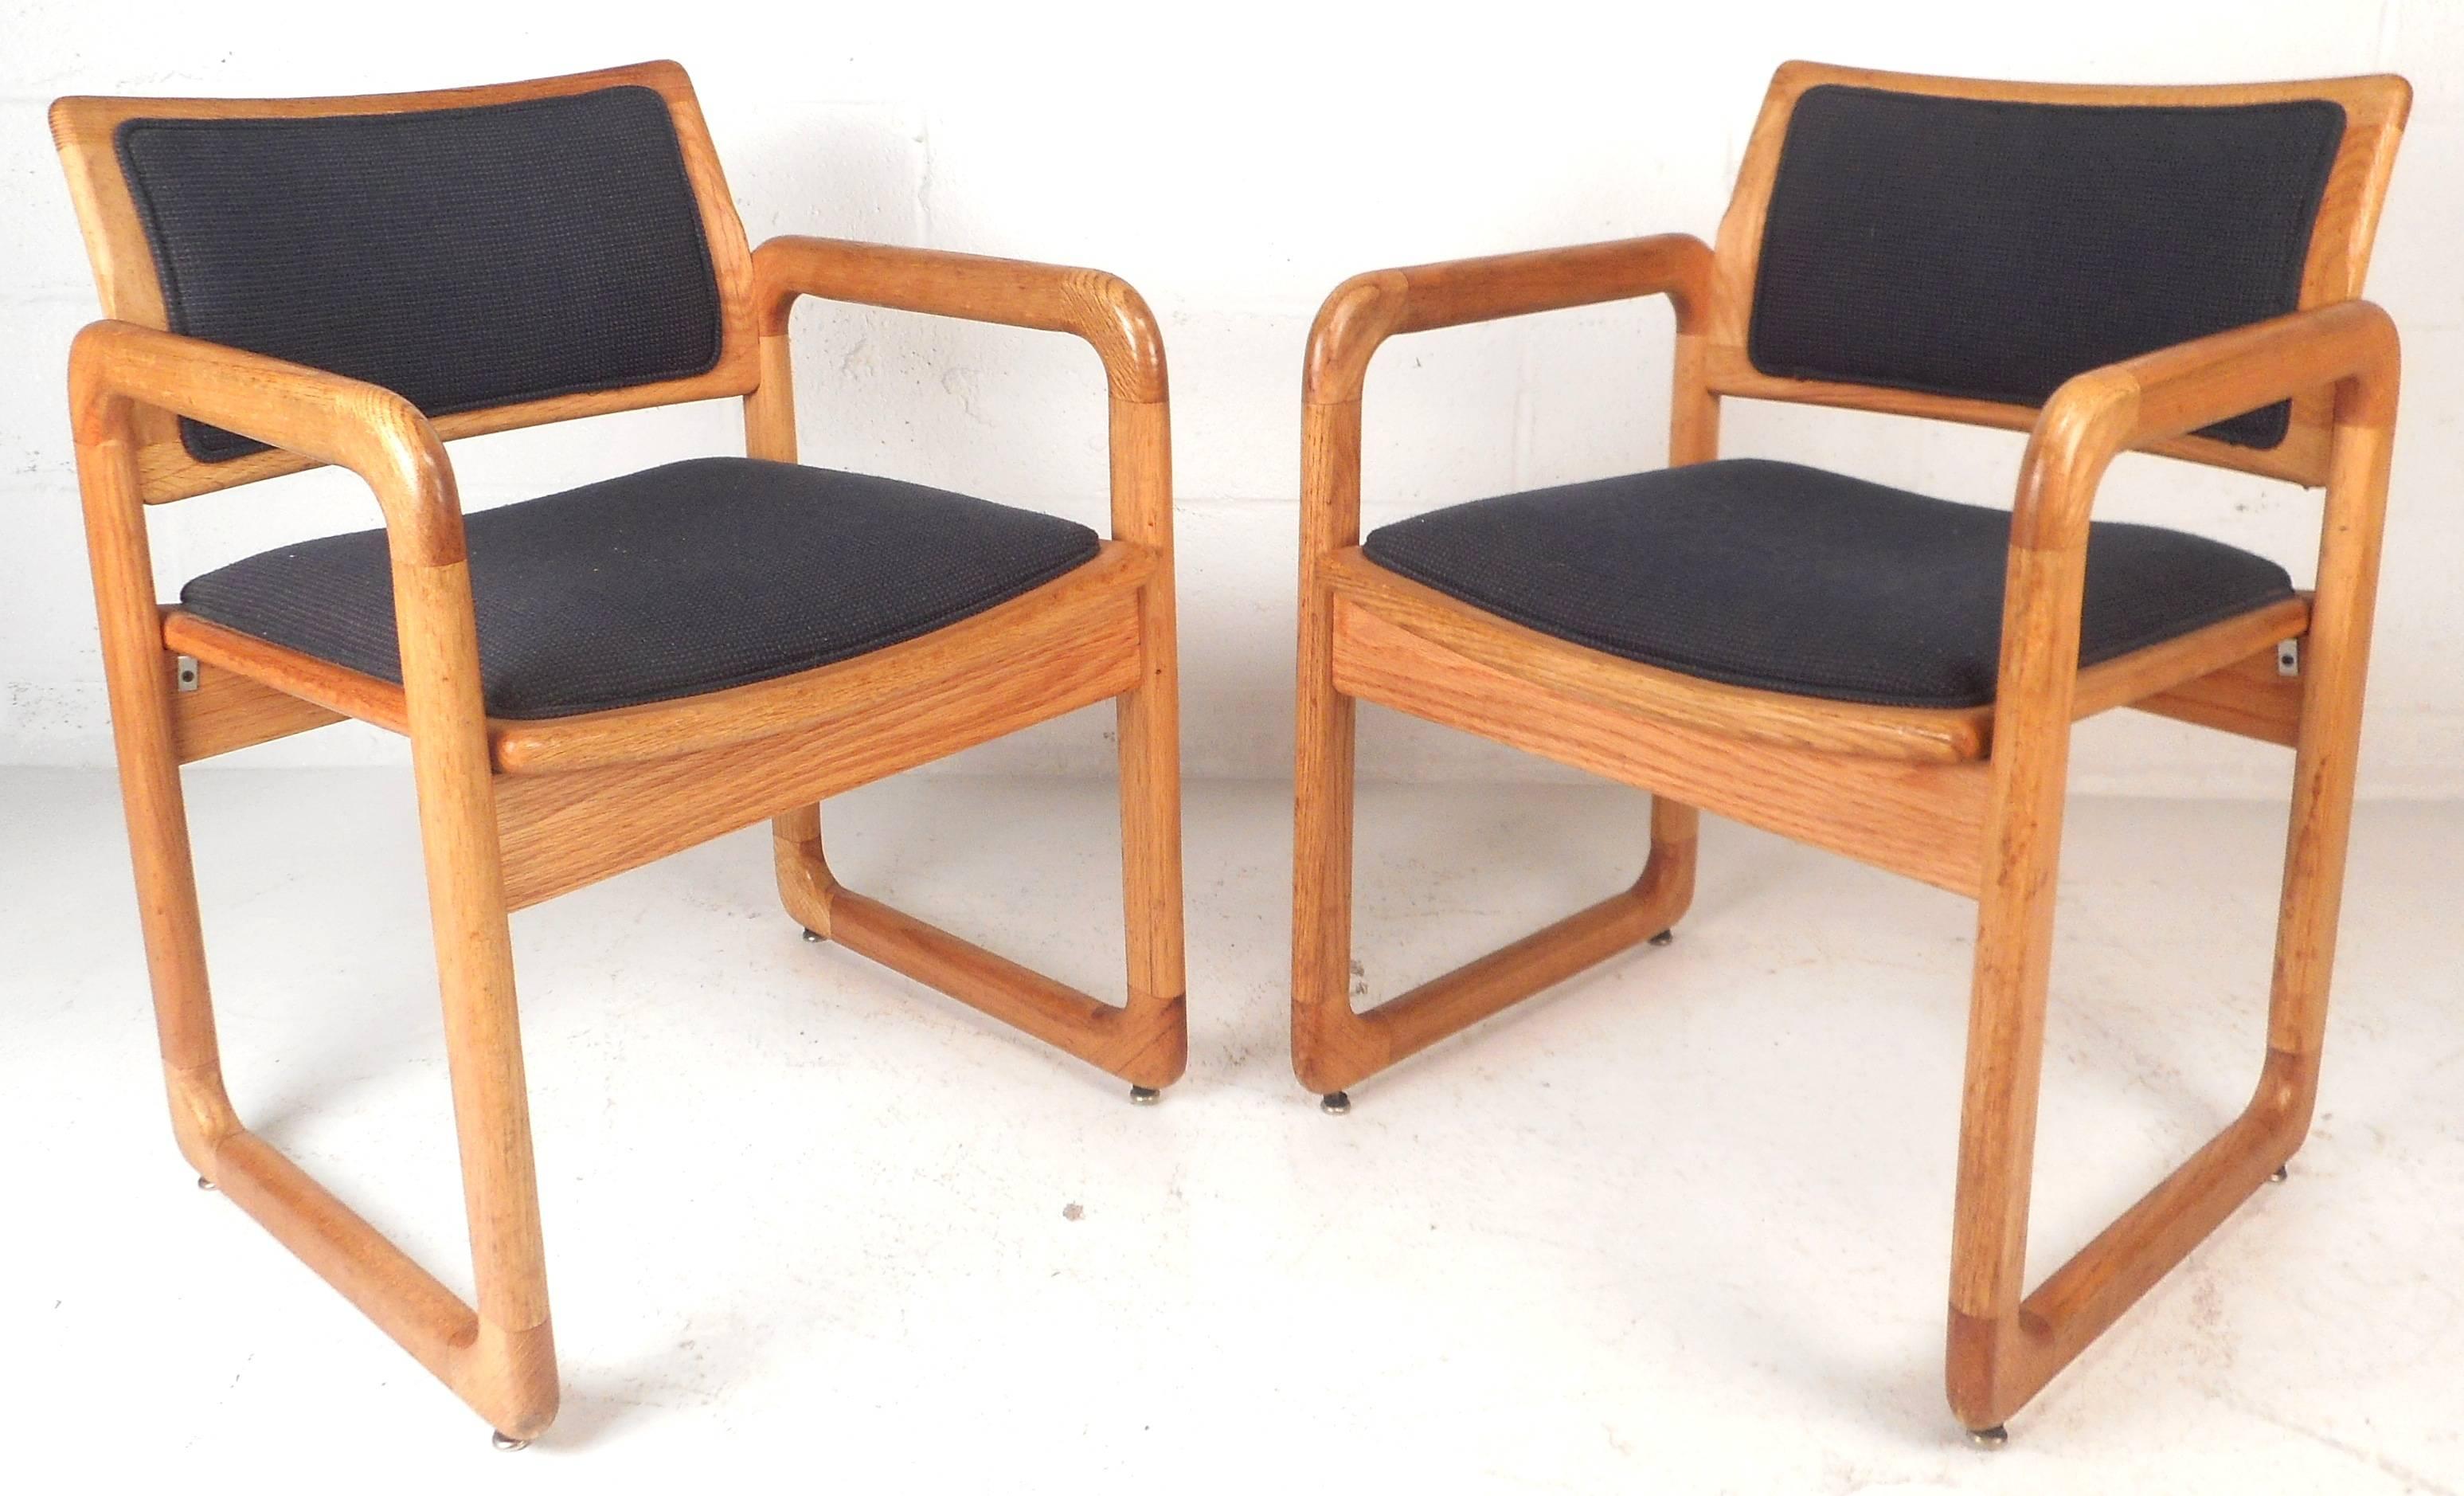 This stunning pair of vintage modern arm chairs feature unique 